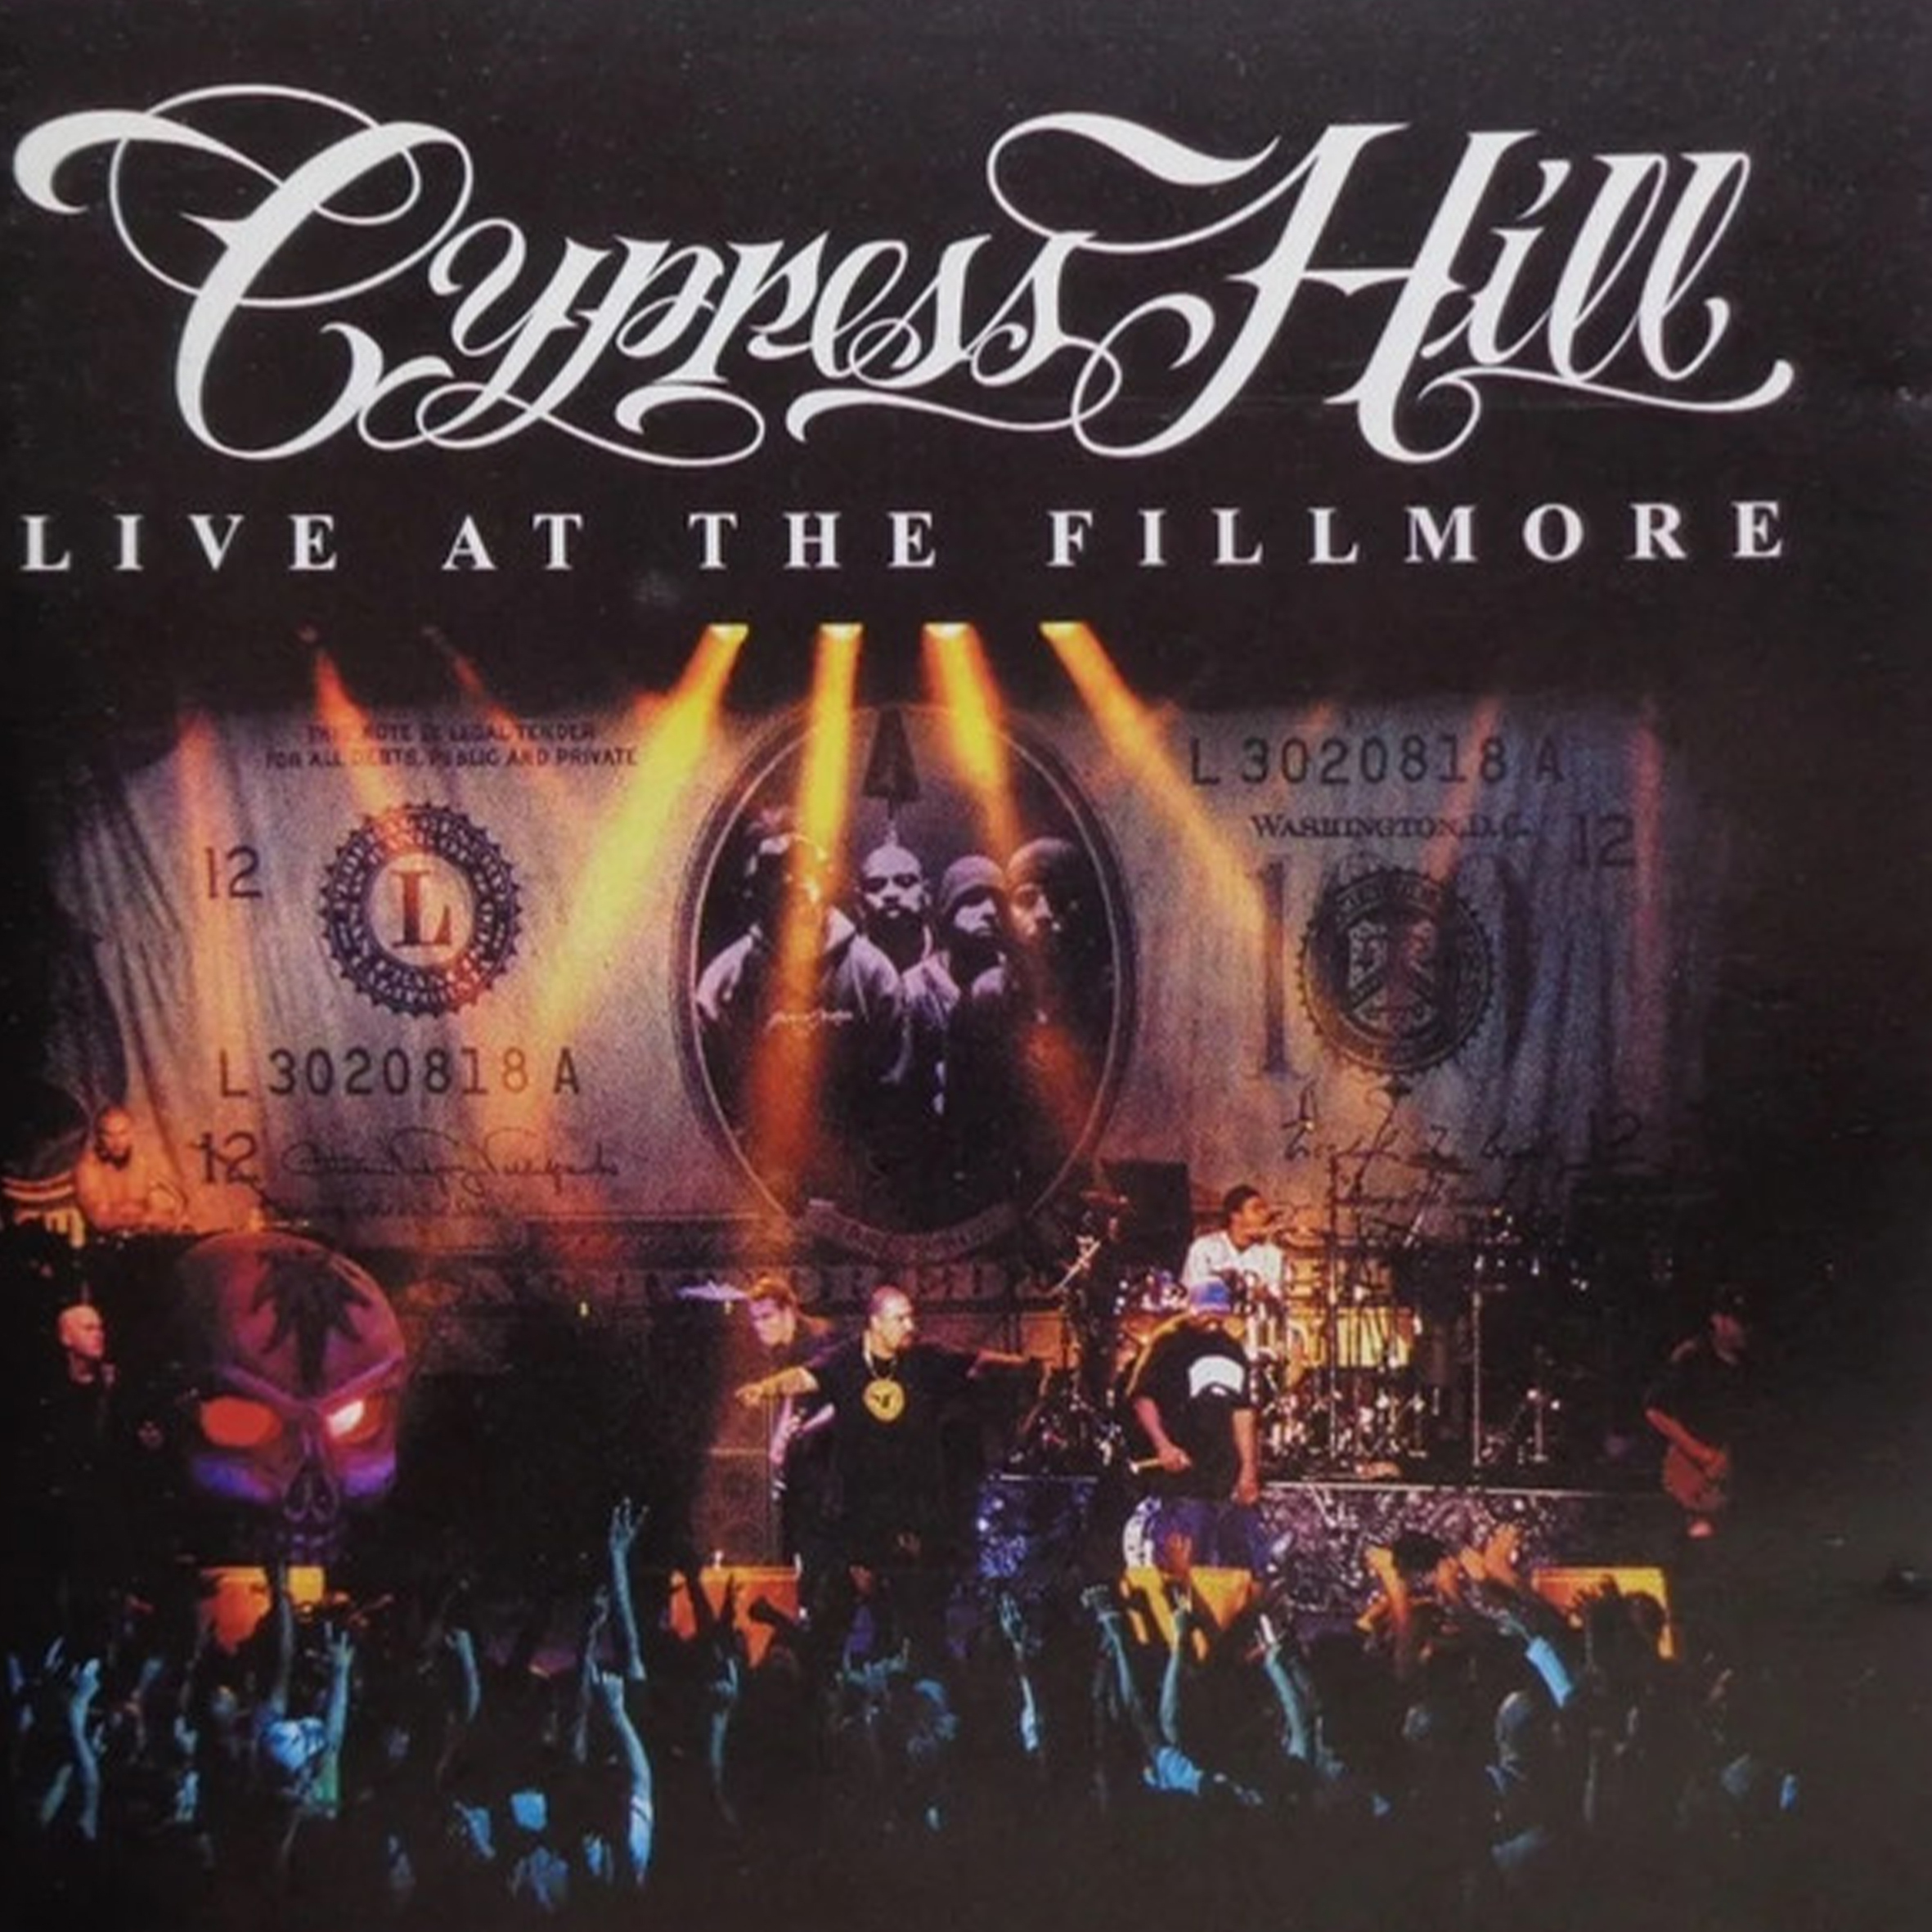 CD - Cypress Hill - Live At The Fillmore